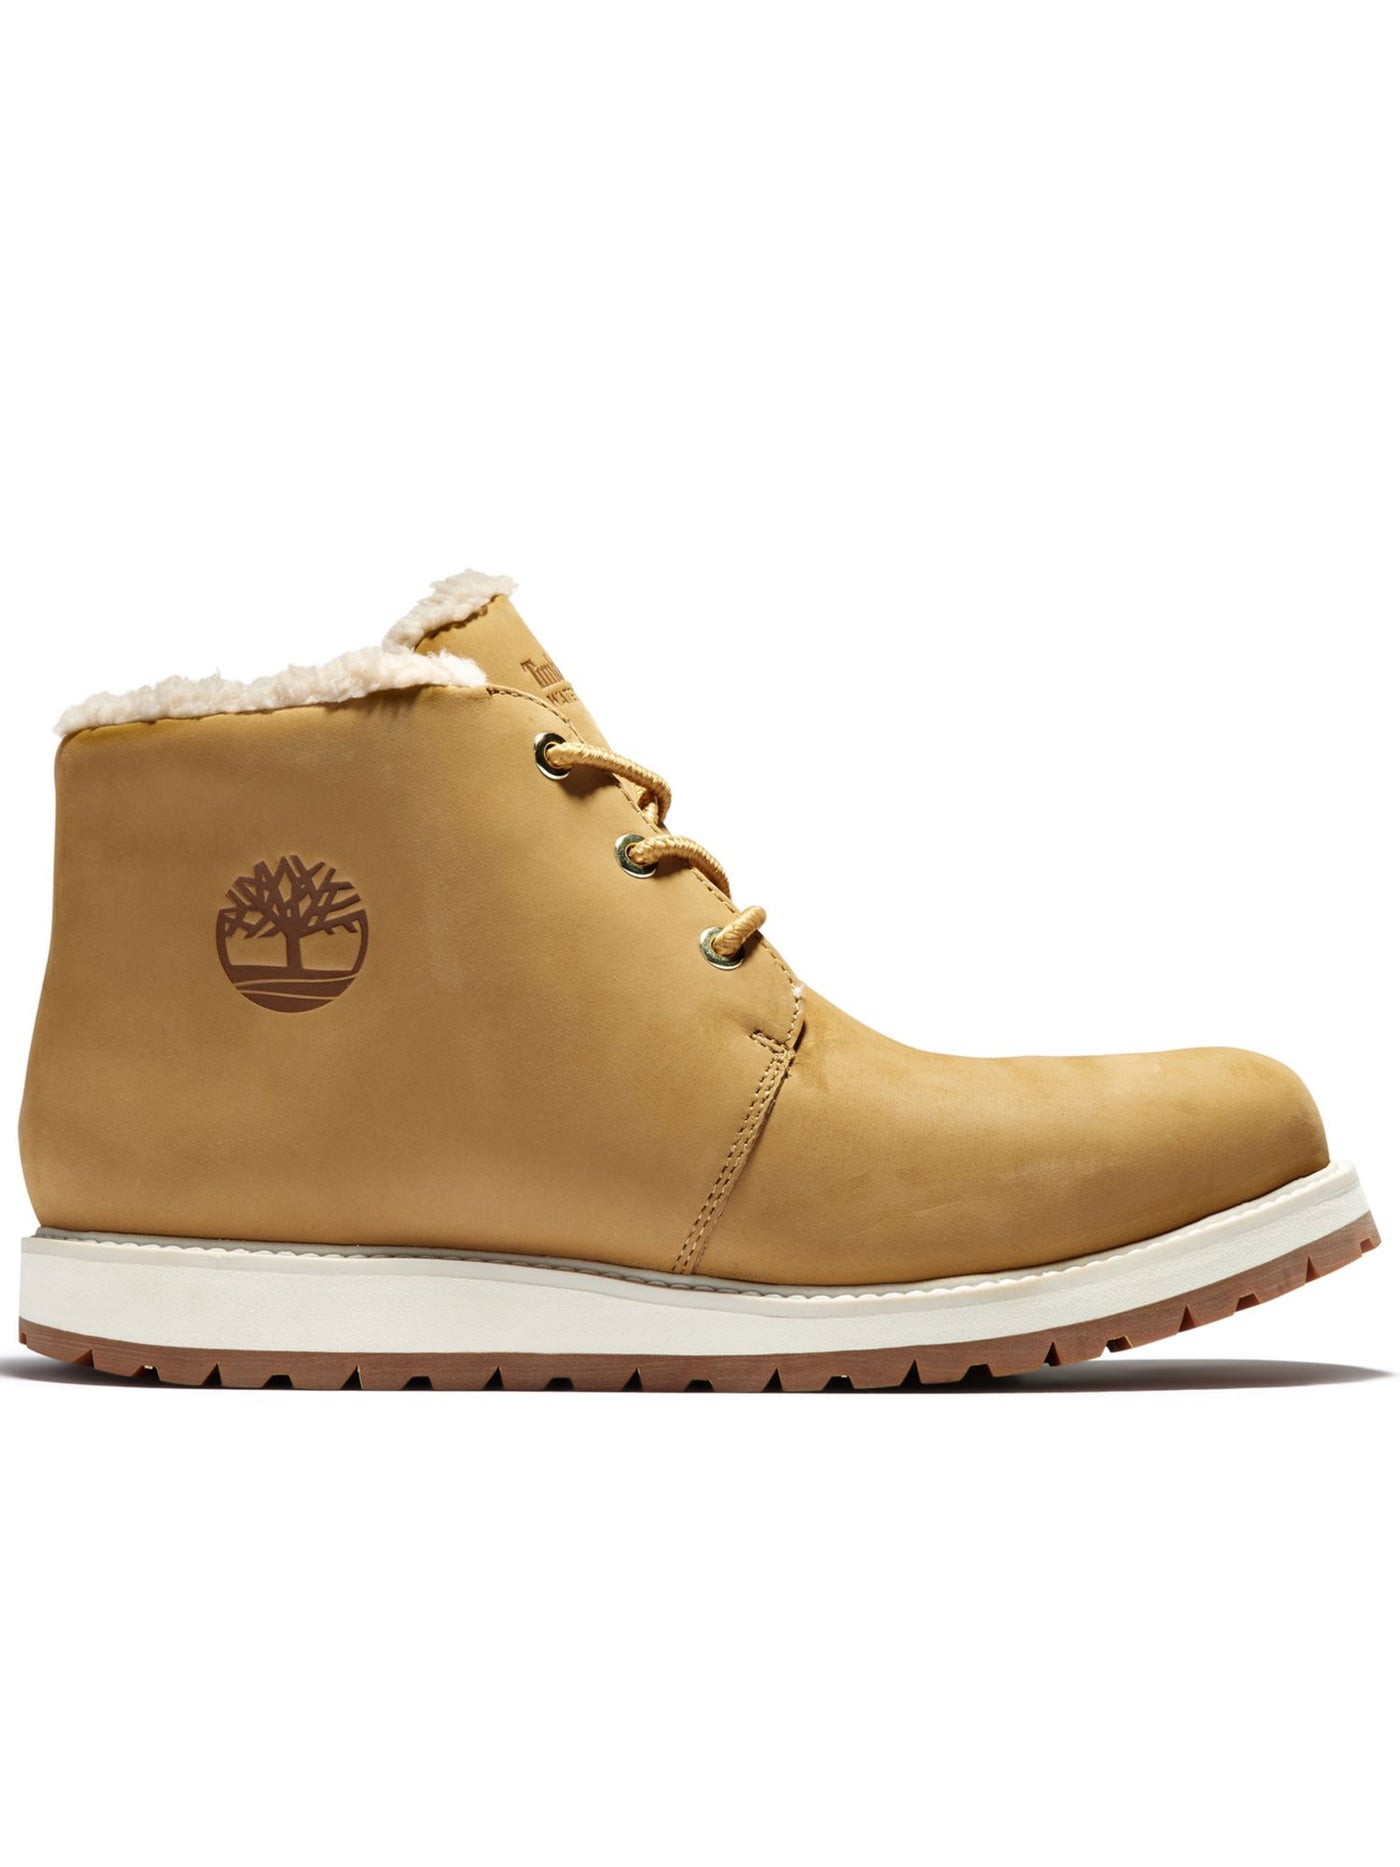 TIMBERLAND Mens Beige Water Resistant Lug Sole Richmond Ridge Round Toe Wedge Lace-Up Leather Chukka Boots 10 M